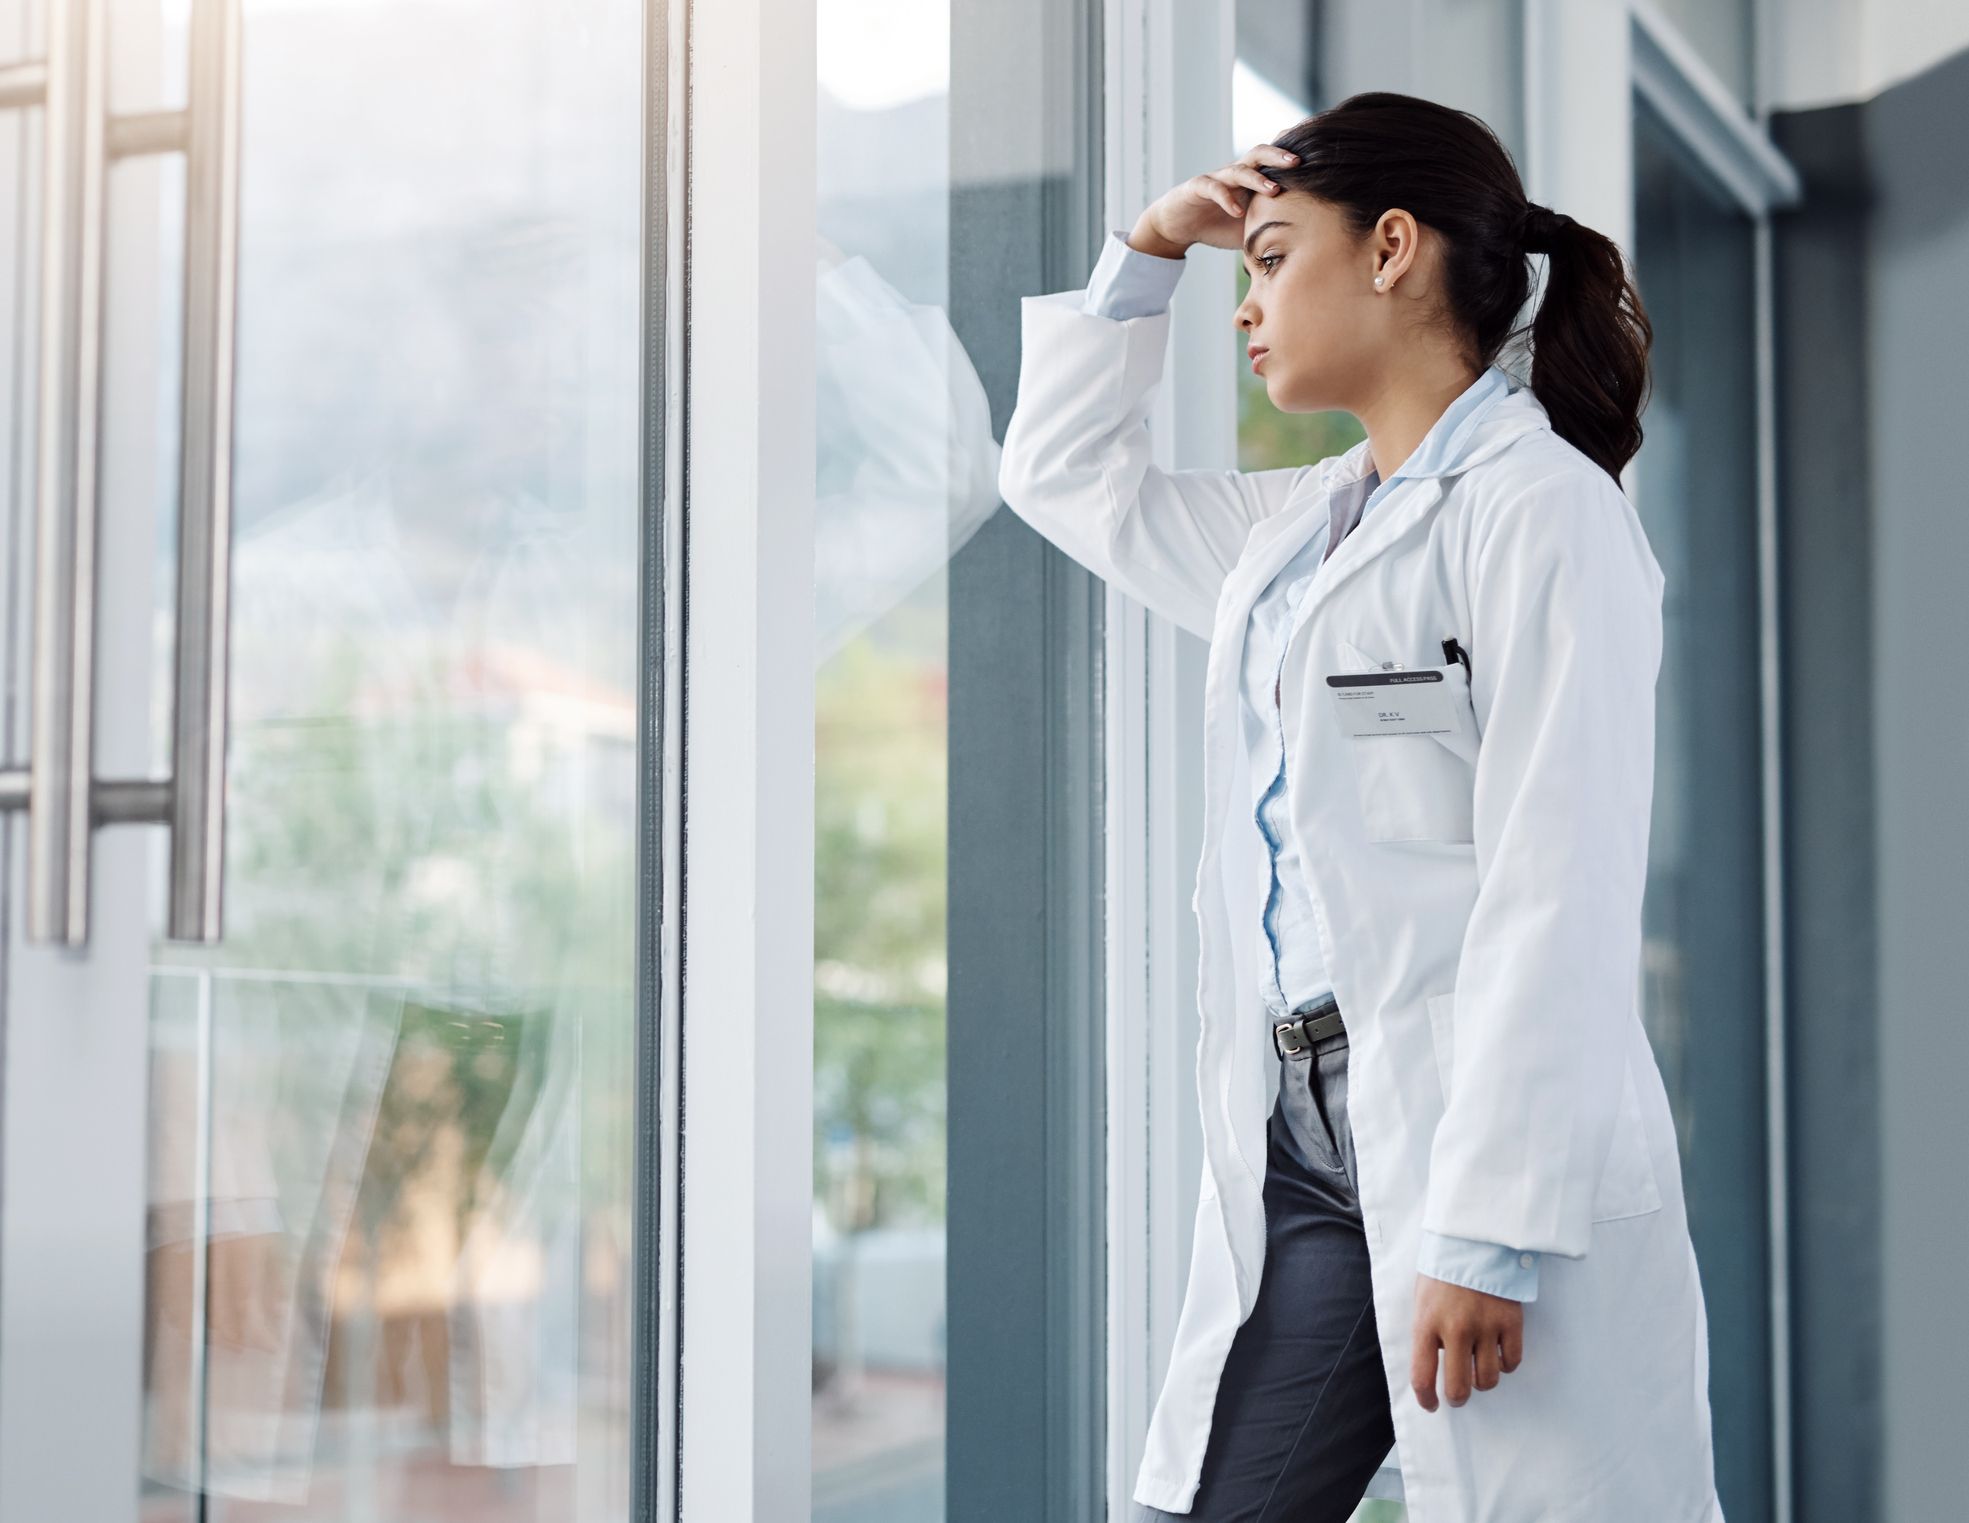 Overwhelmed Employees and Burned-out Clinicians: The Shared Causes and What to Do About It